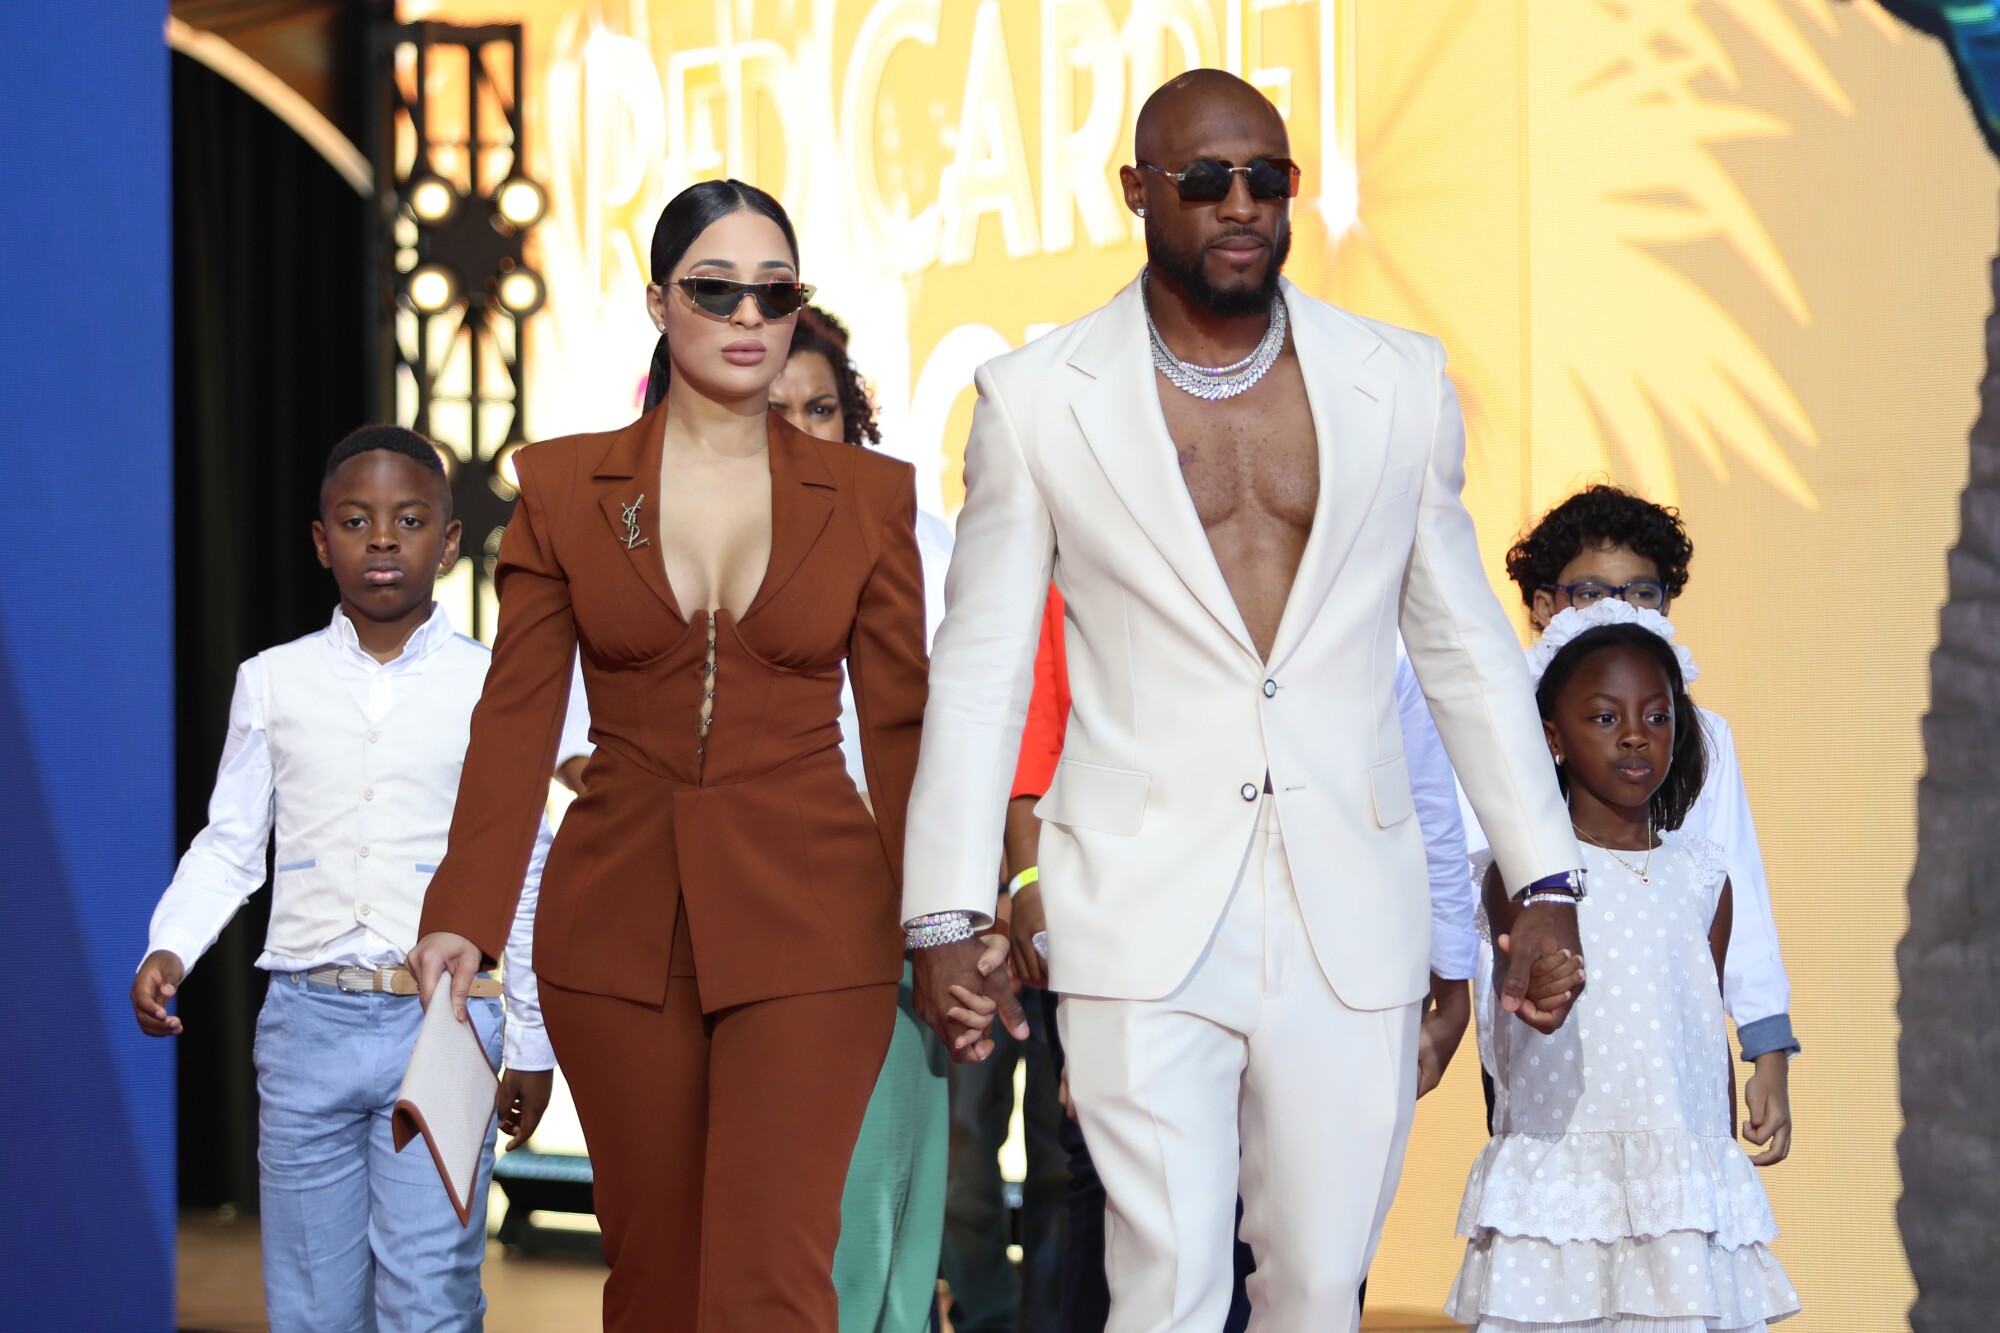 Starling Marte in a white suit and his family arrive at the 2022 MLB All-Star Game Red Carpet Show.